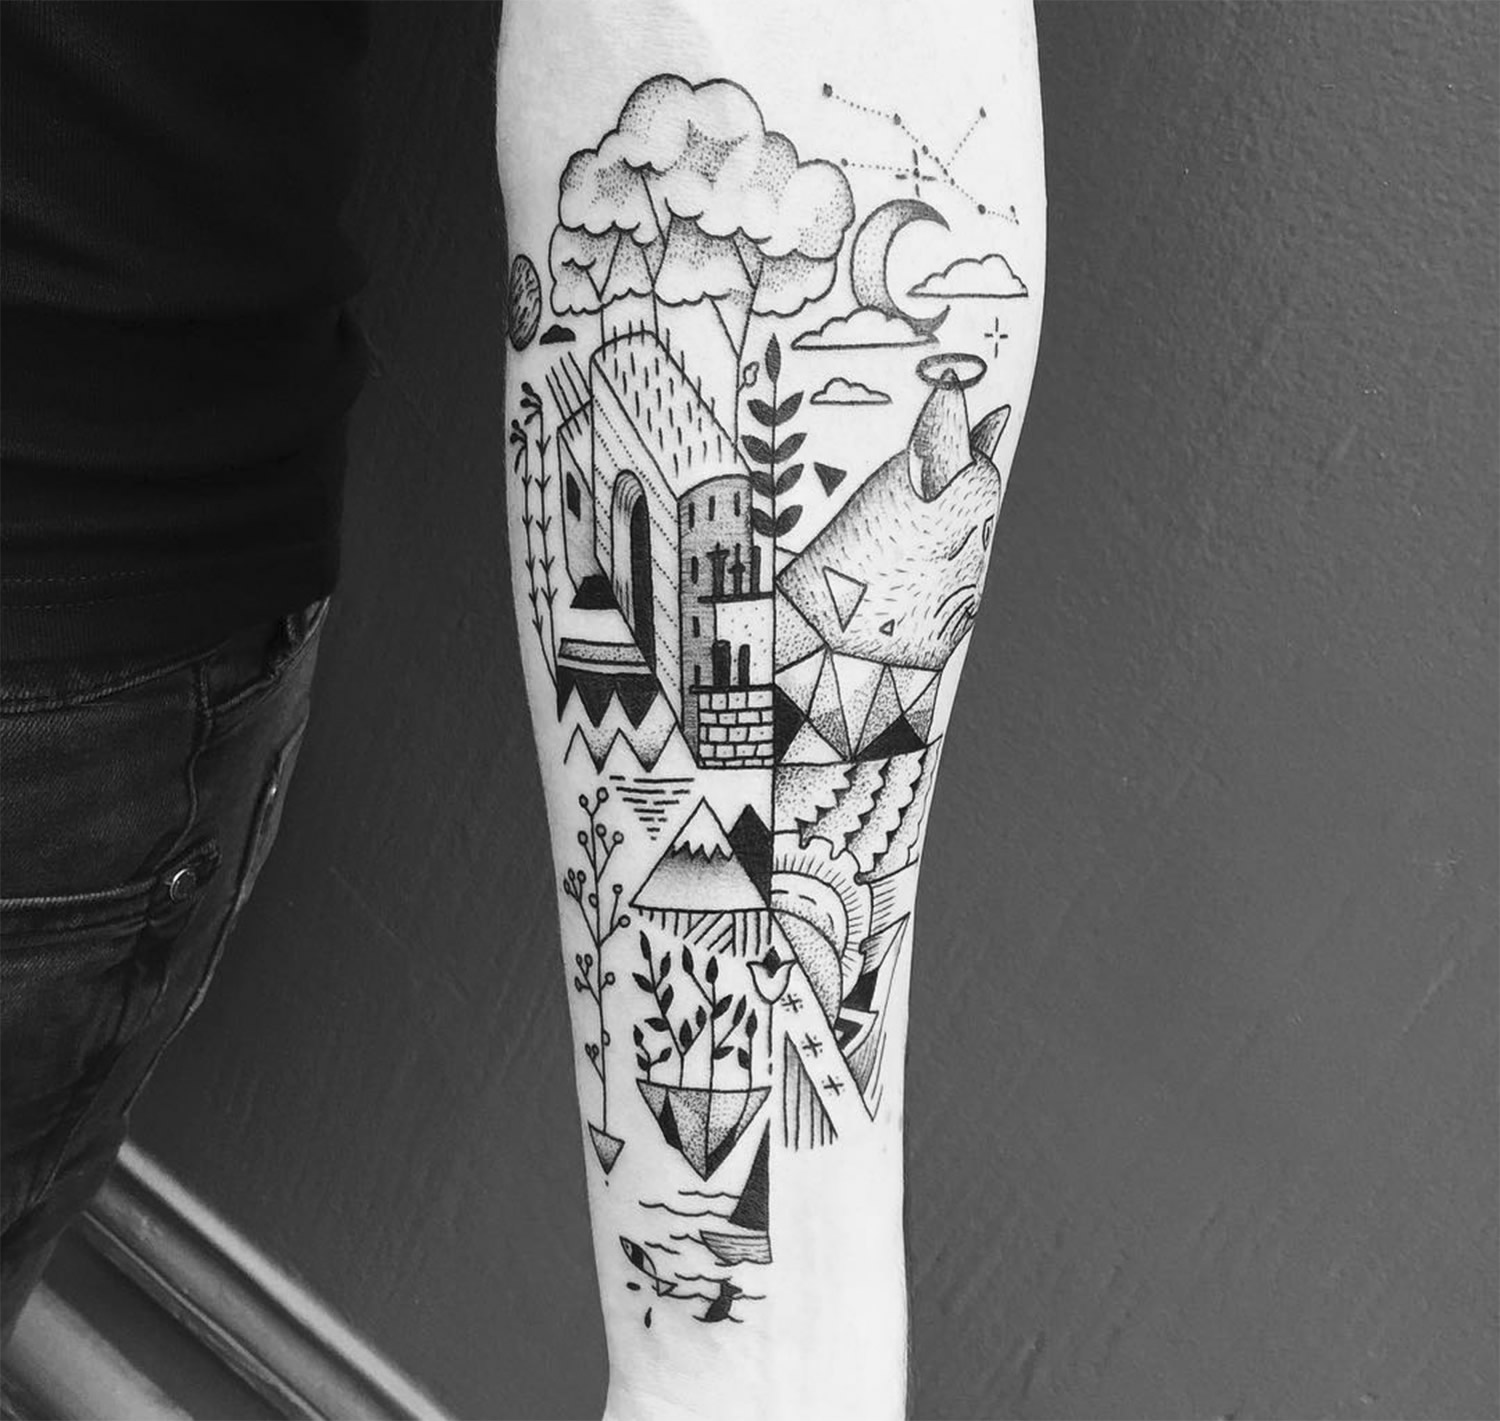 Tattoo composed of various landscape and geometric elements by Mast cora